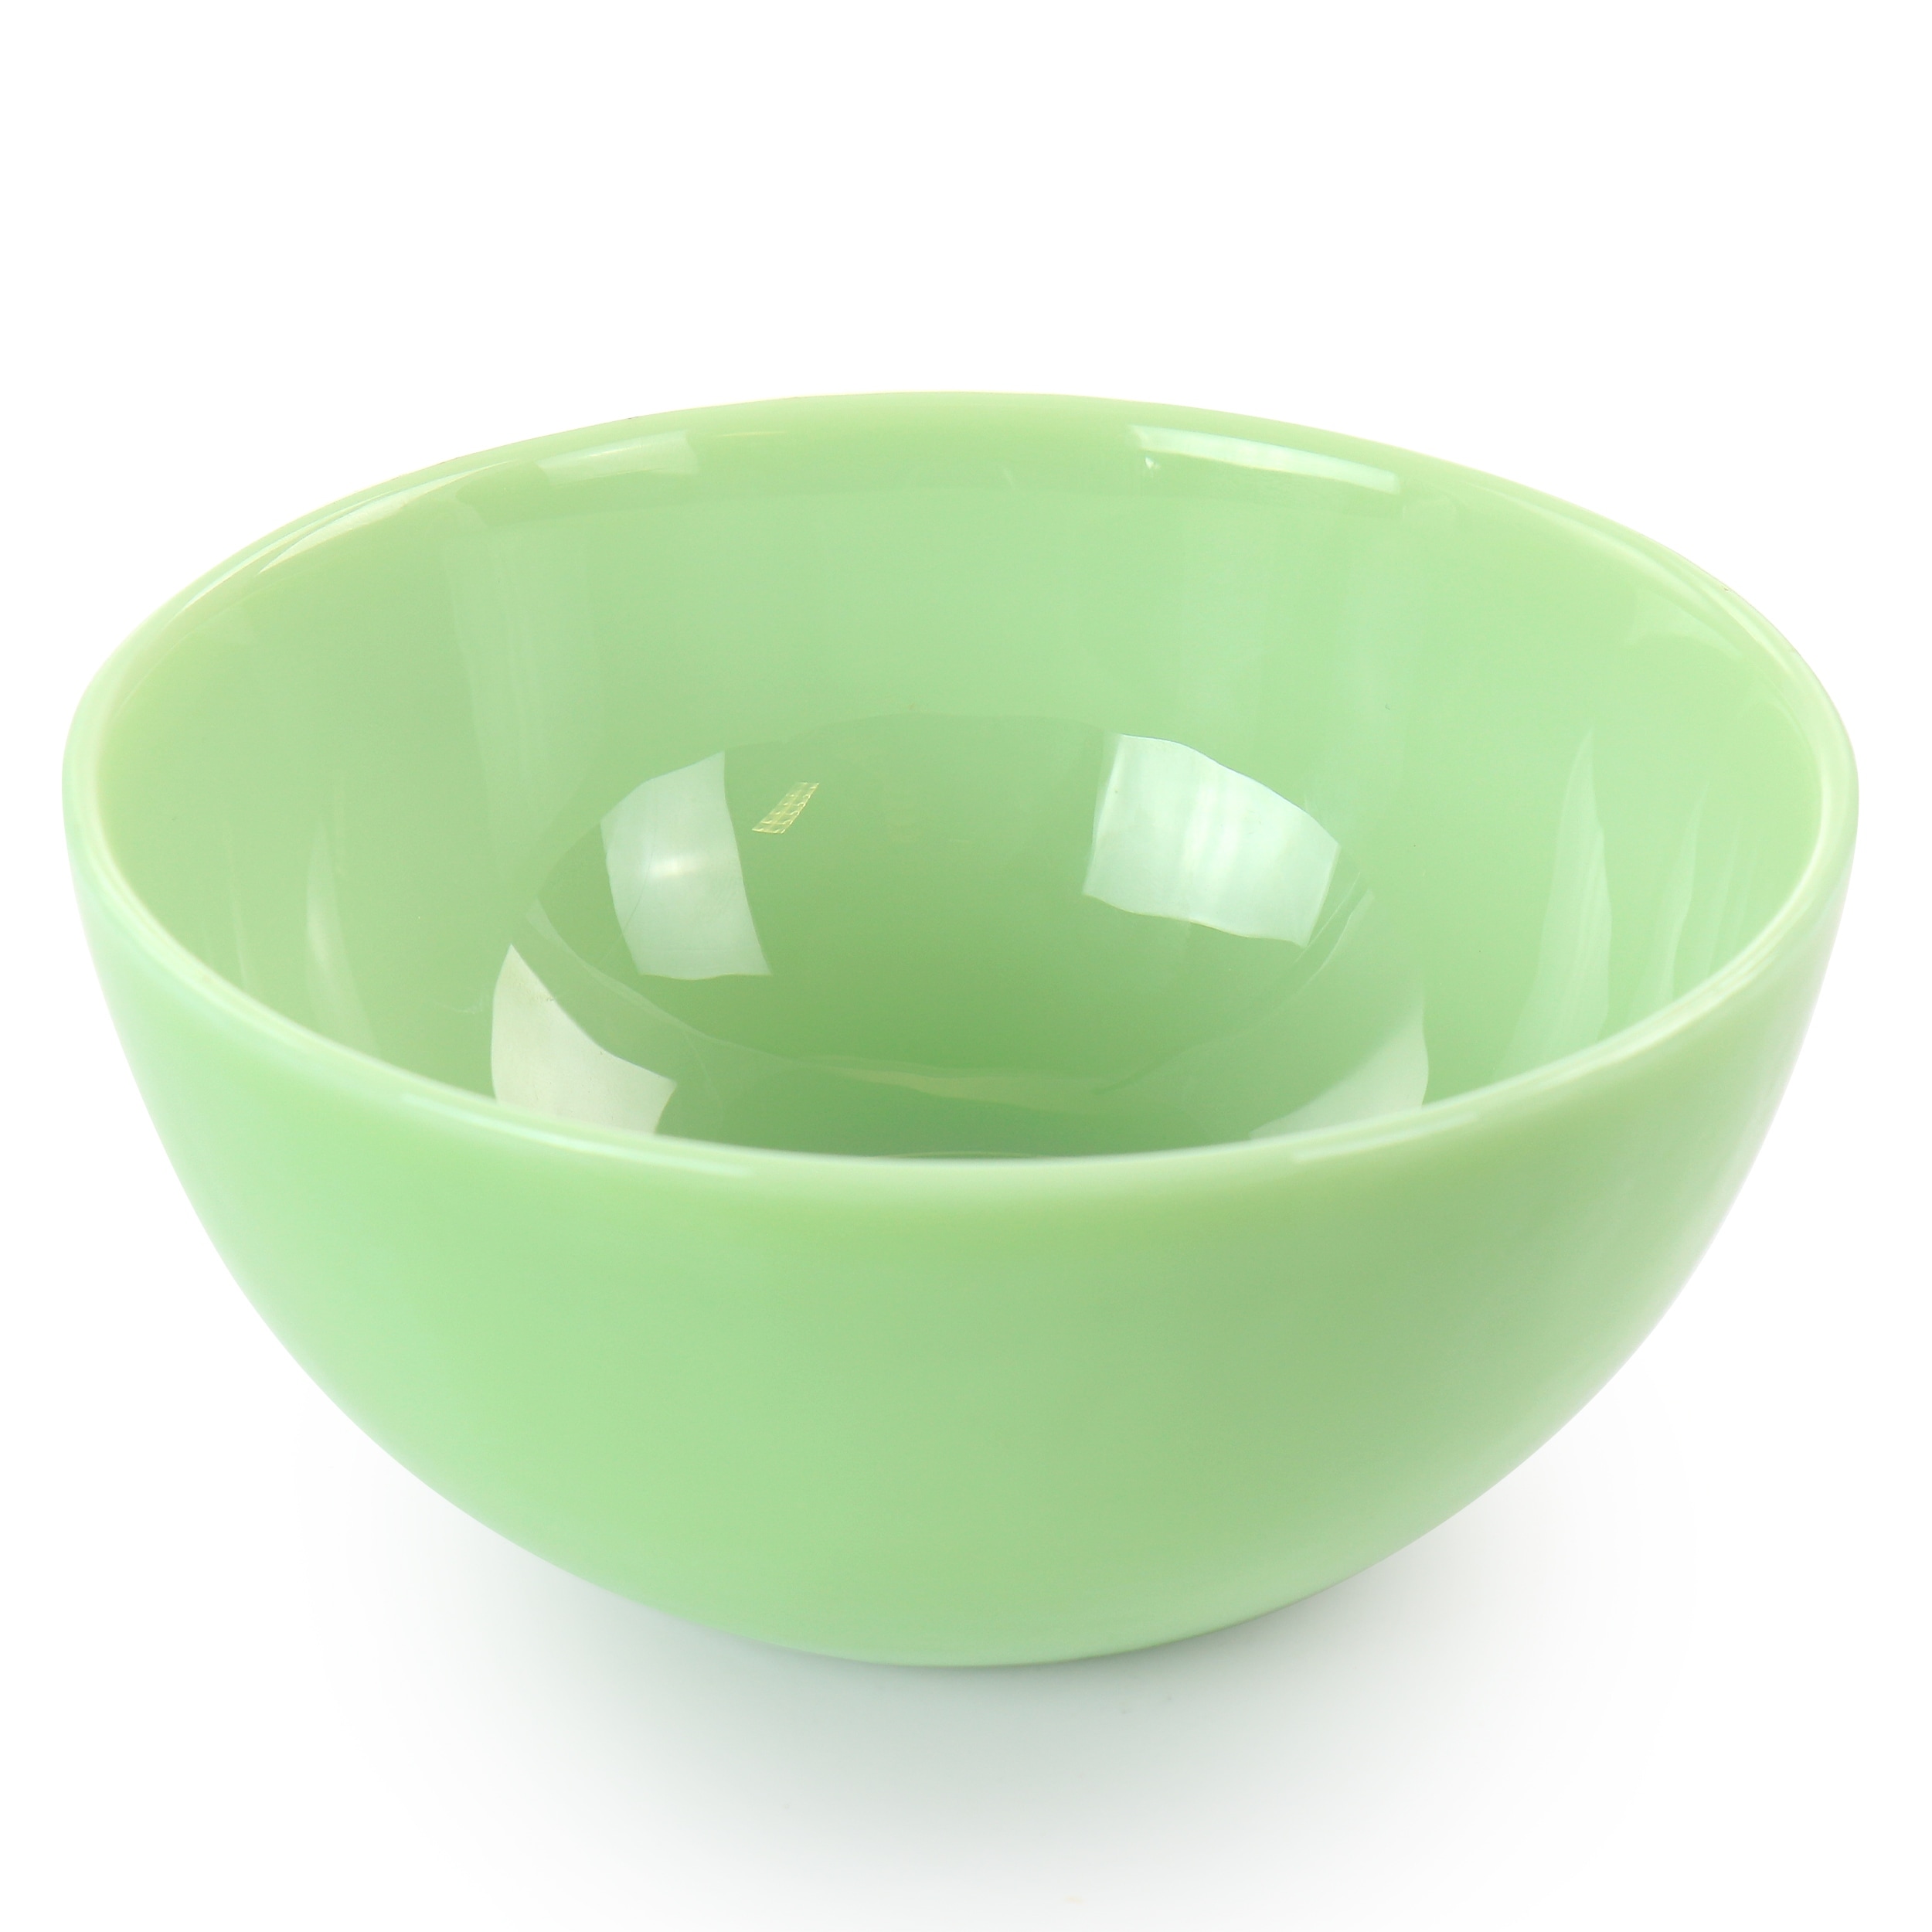 Antique Jadeite Mixing Bowl With Handles. Large Green Bowl. 